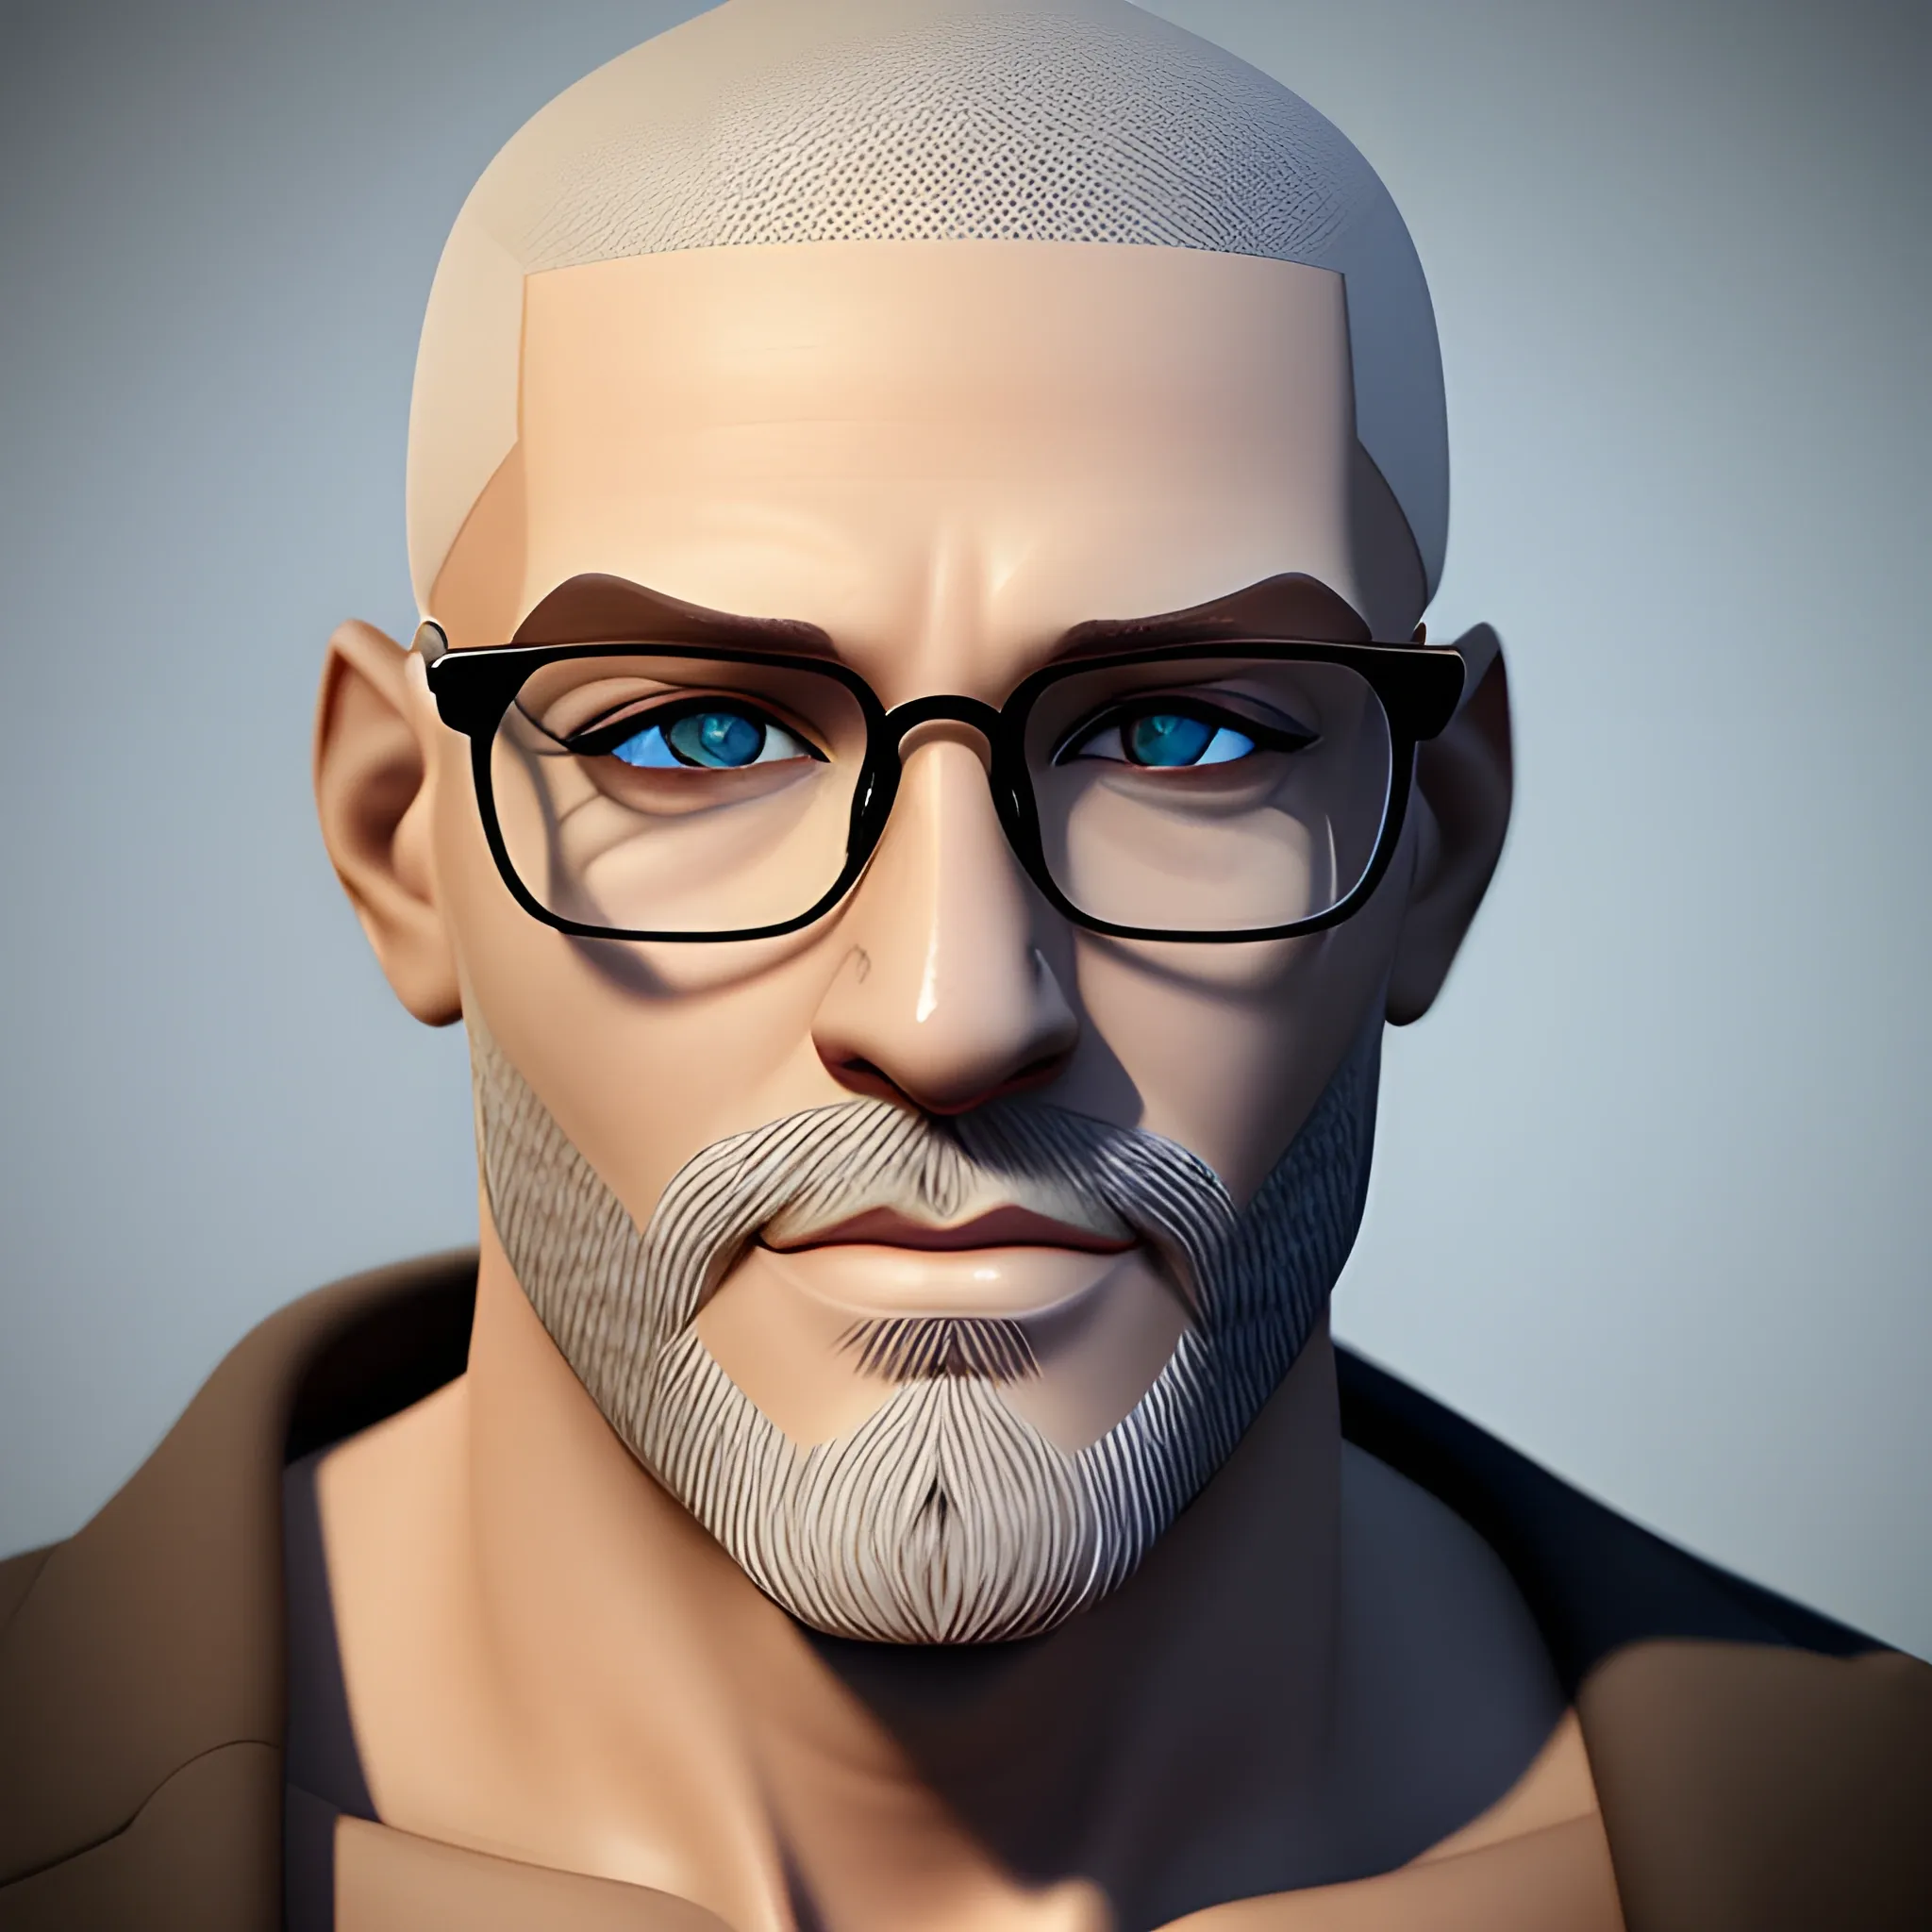 
, 3D  a man with shaved hair, brown and some gray, beard and glasses. blue eyes. realistic and urban style

